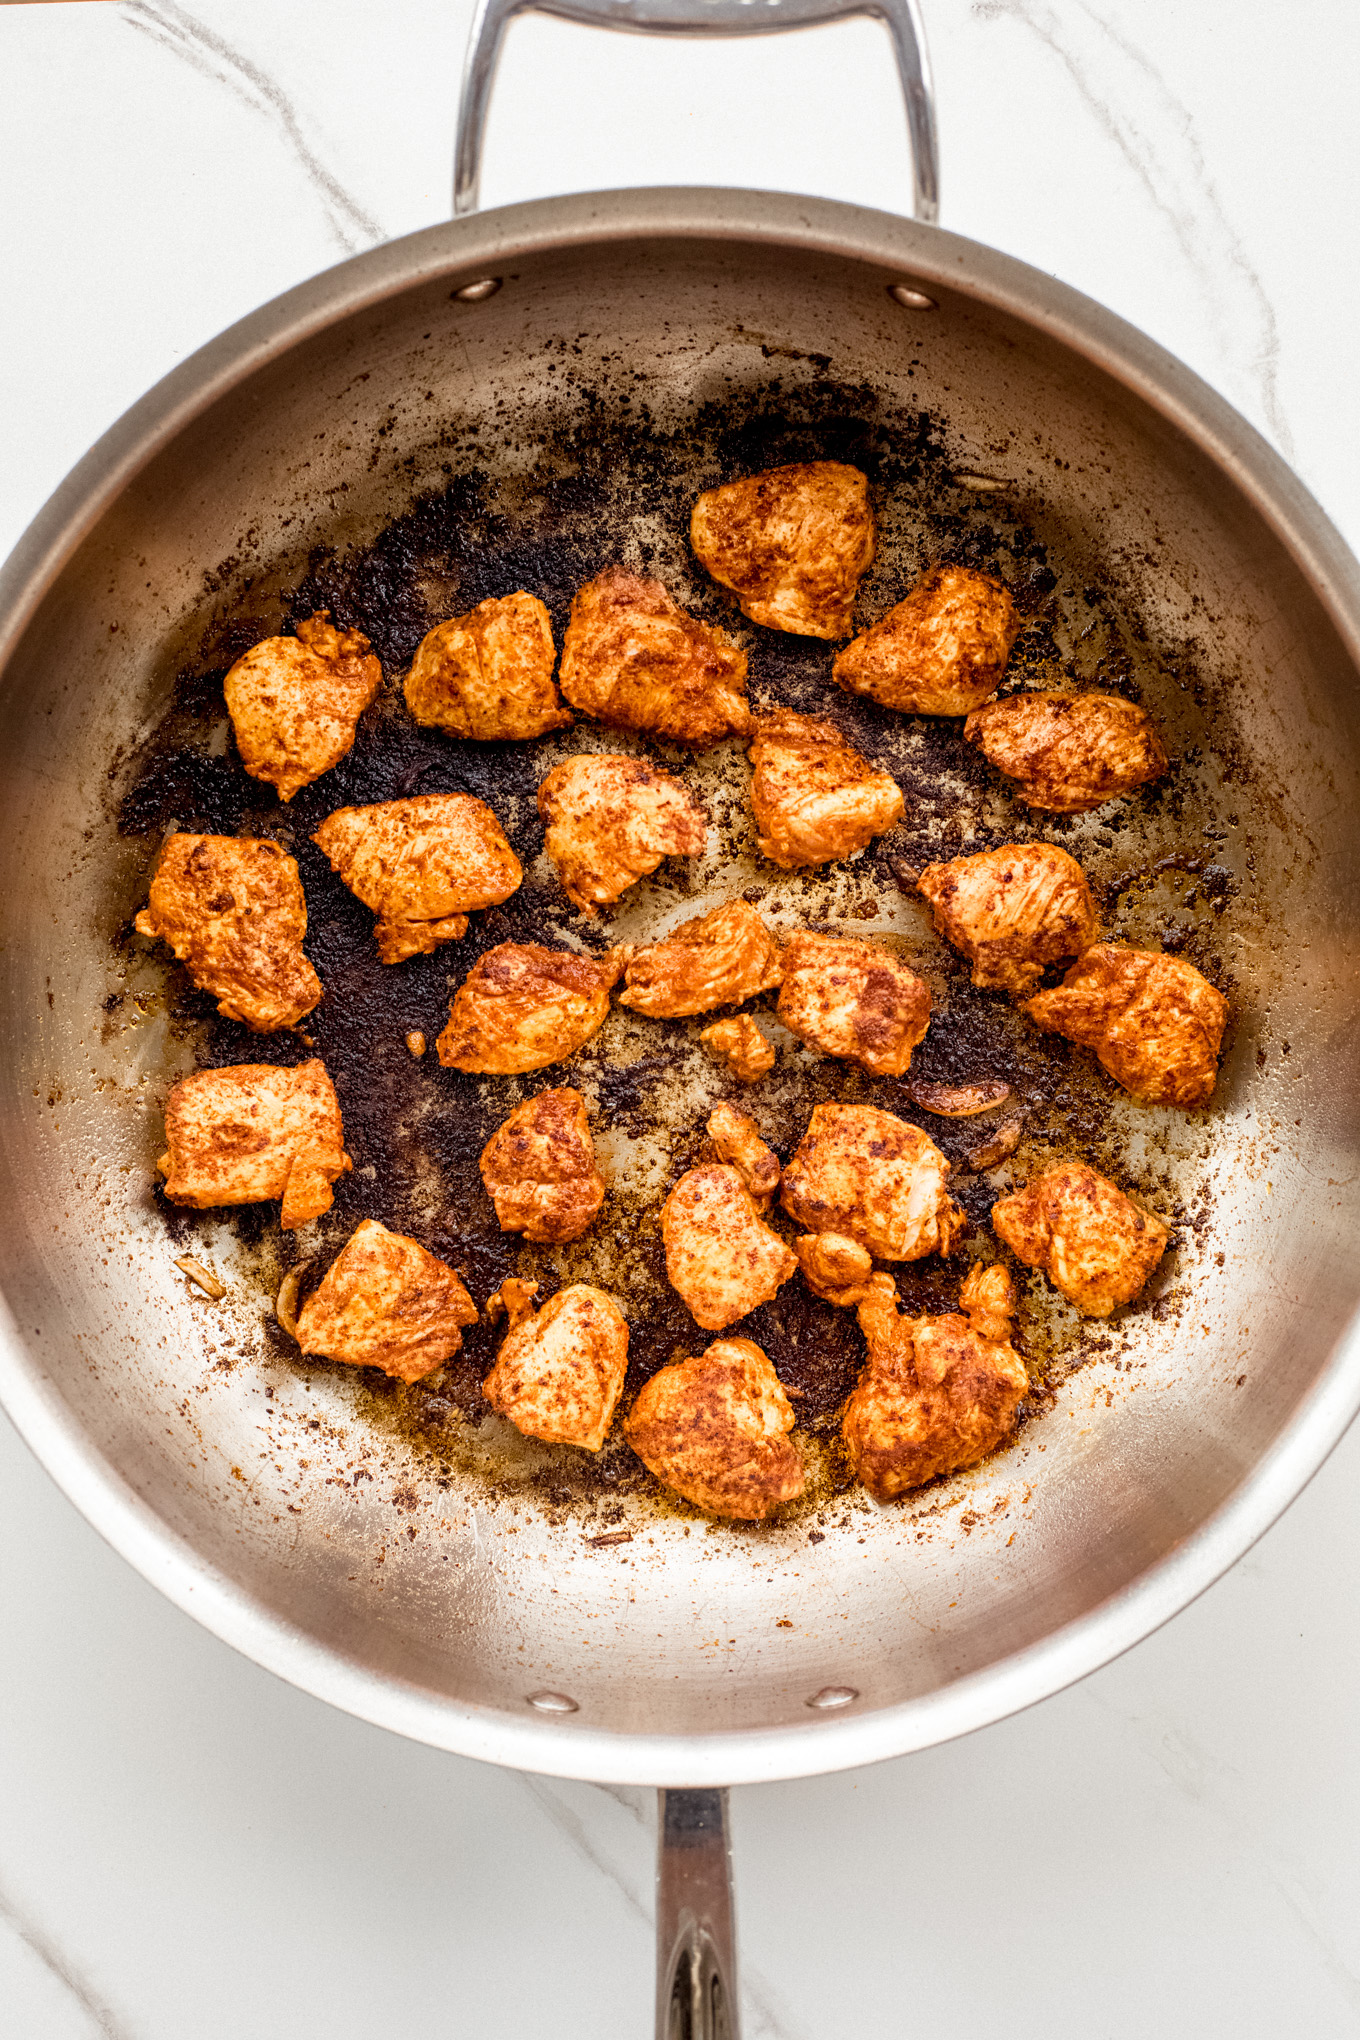 cooked chicken pieces in a saute pan.